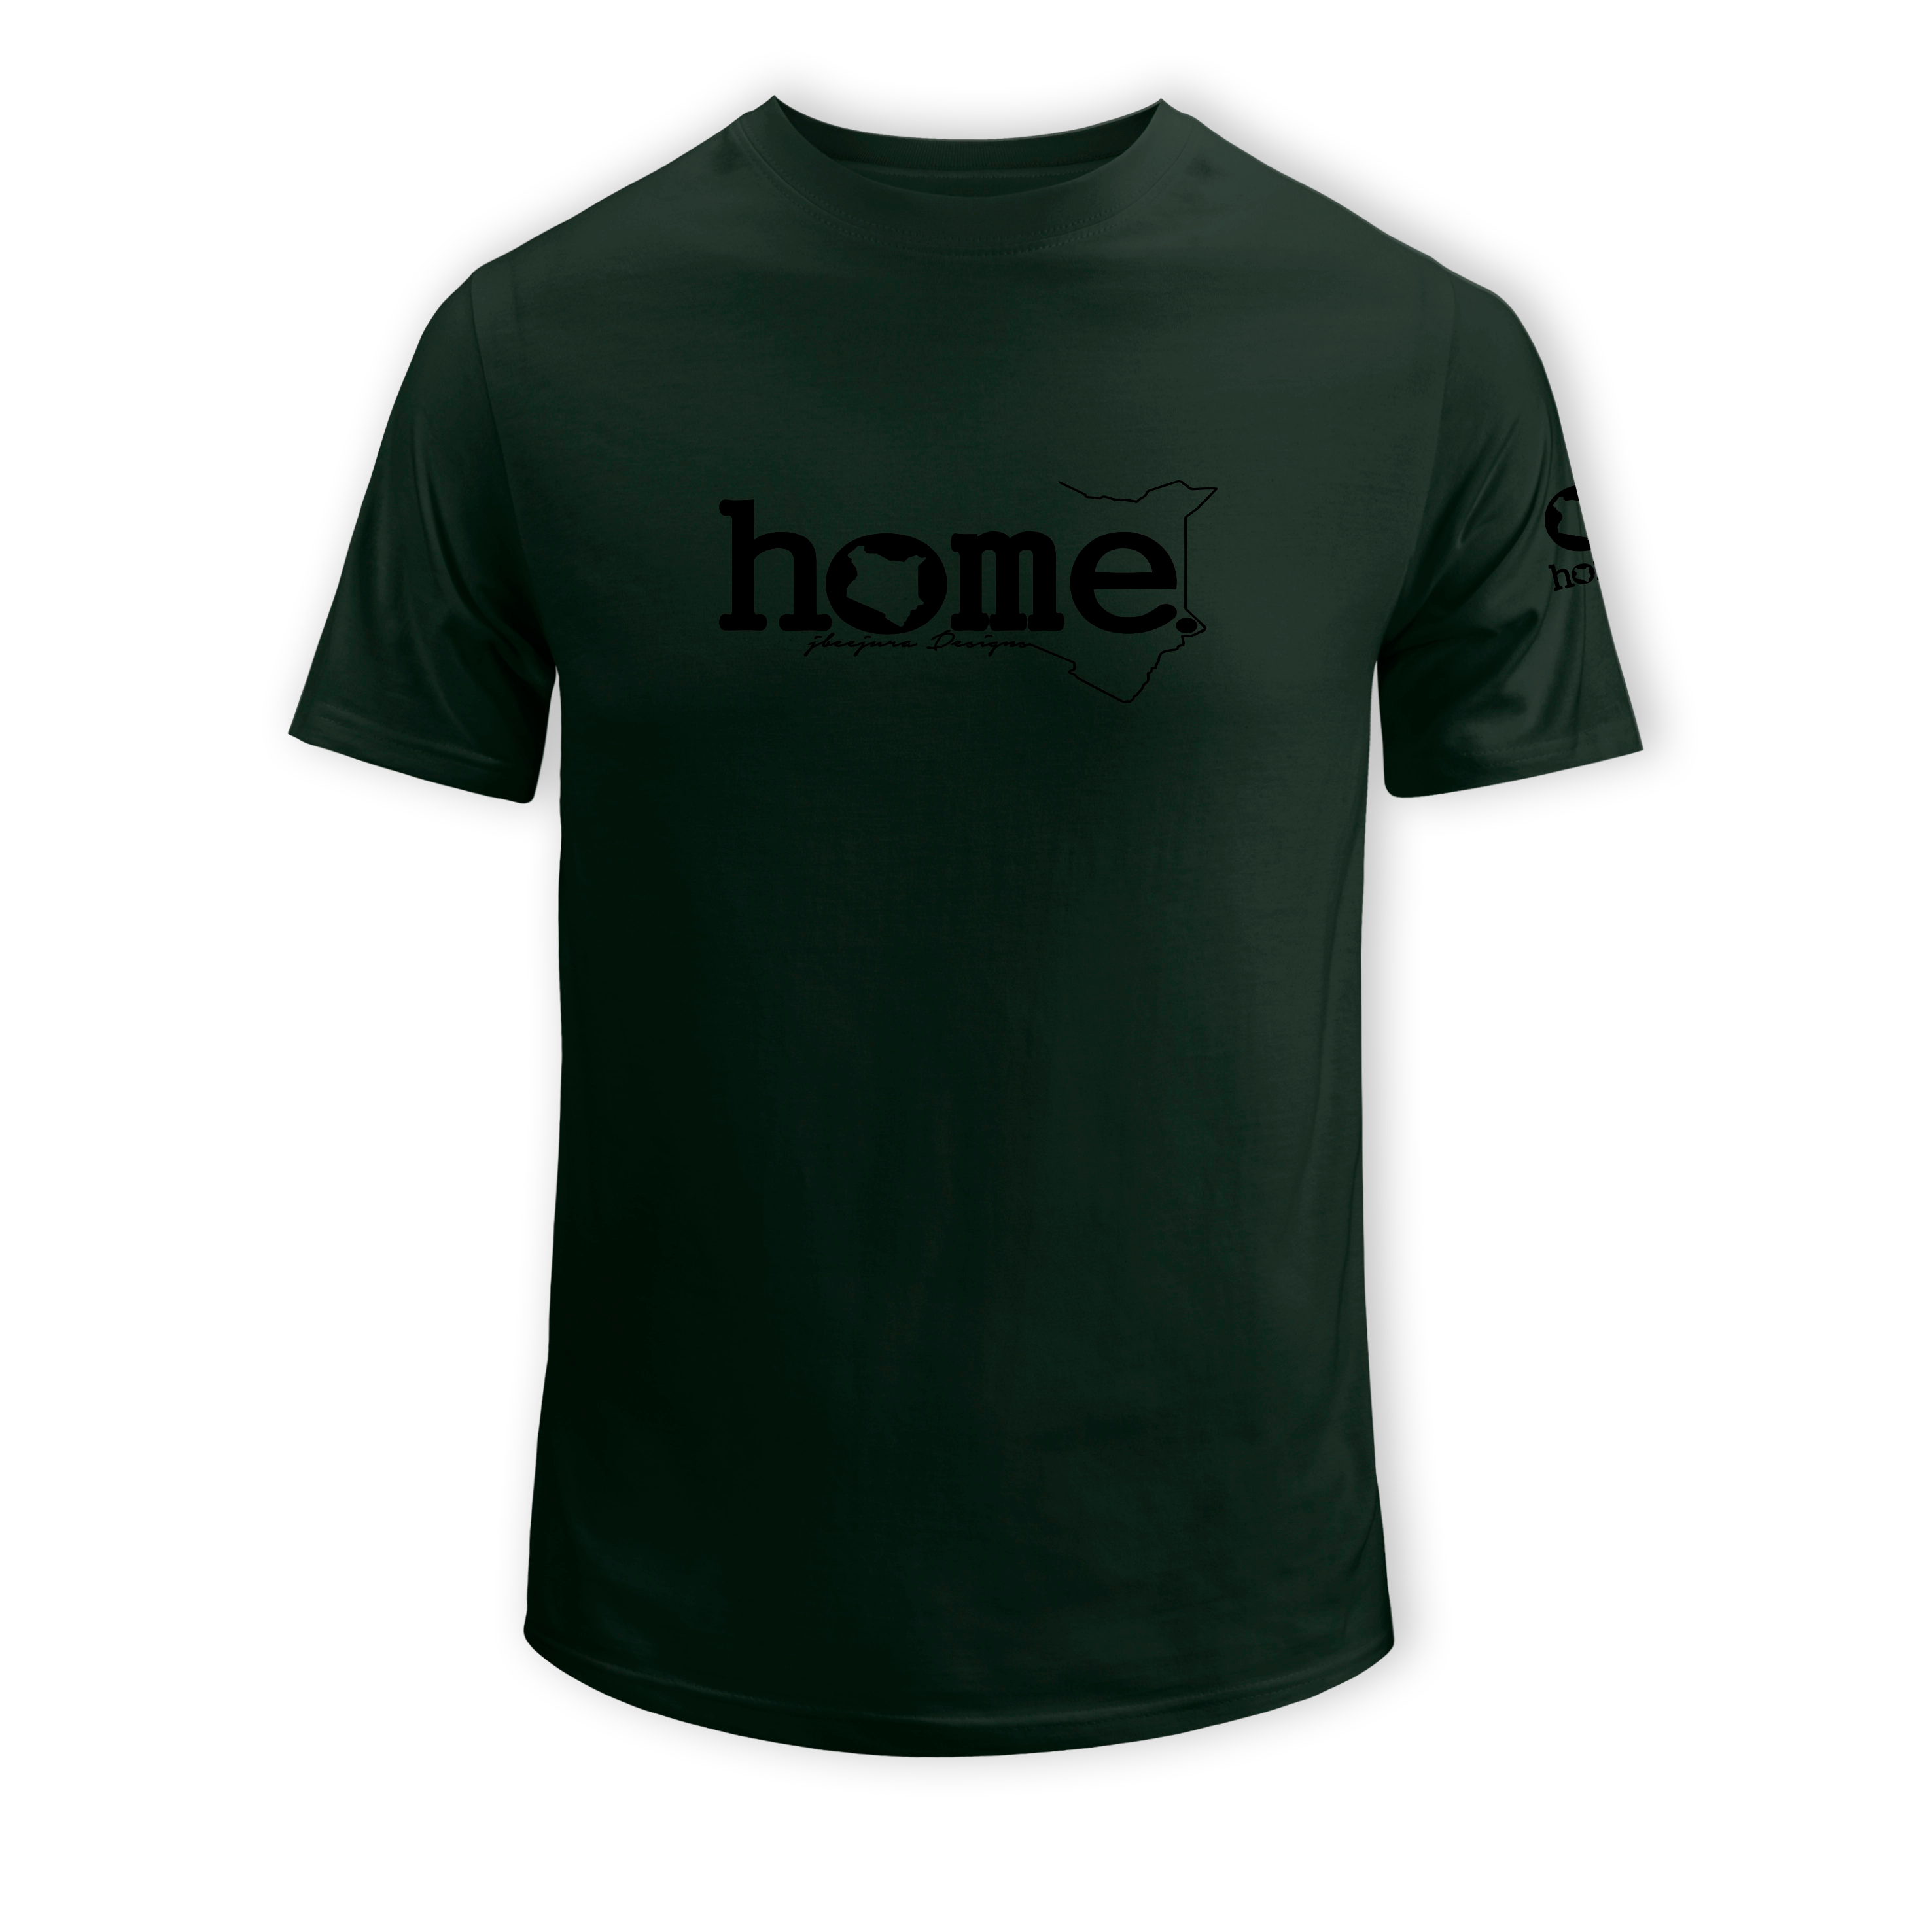 home_254 KIDS SHORT-SLEEVED FOREST GREEN T-SHIRT WITH A BLACK CLASSIC WORDS PRINT – COTTON PLUS FABRIC